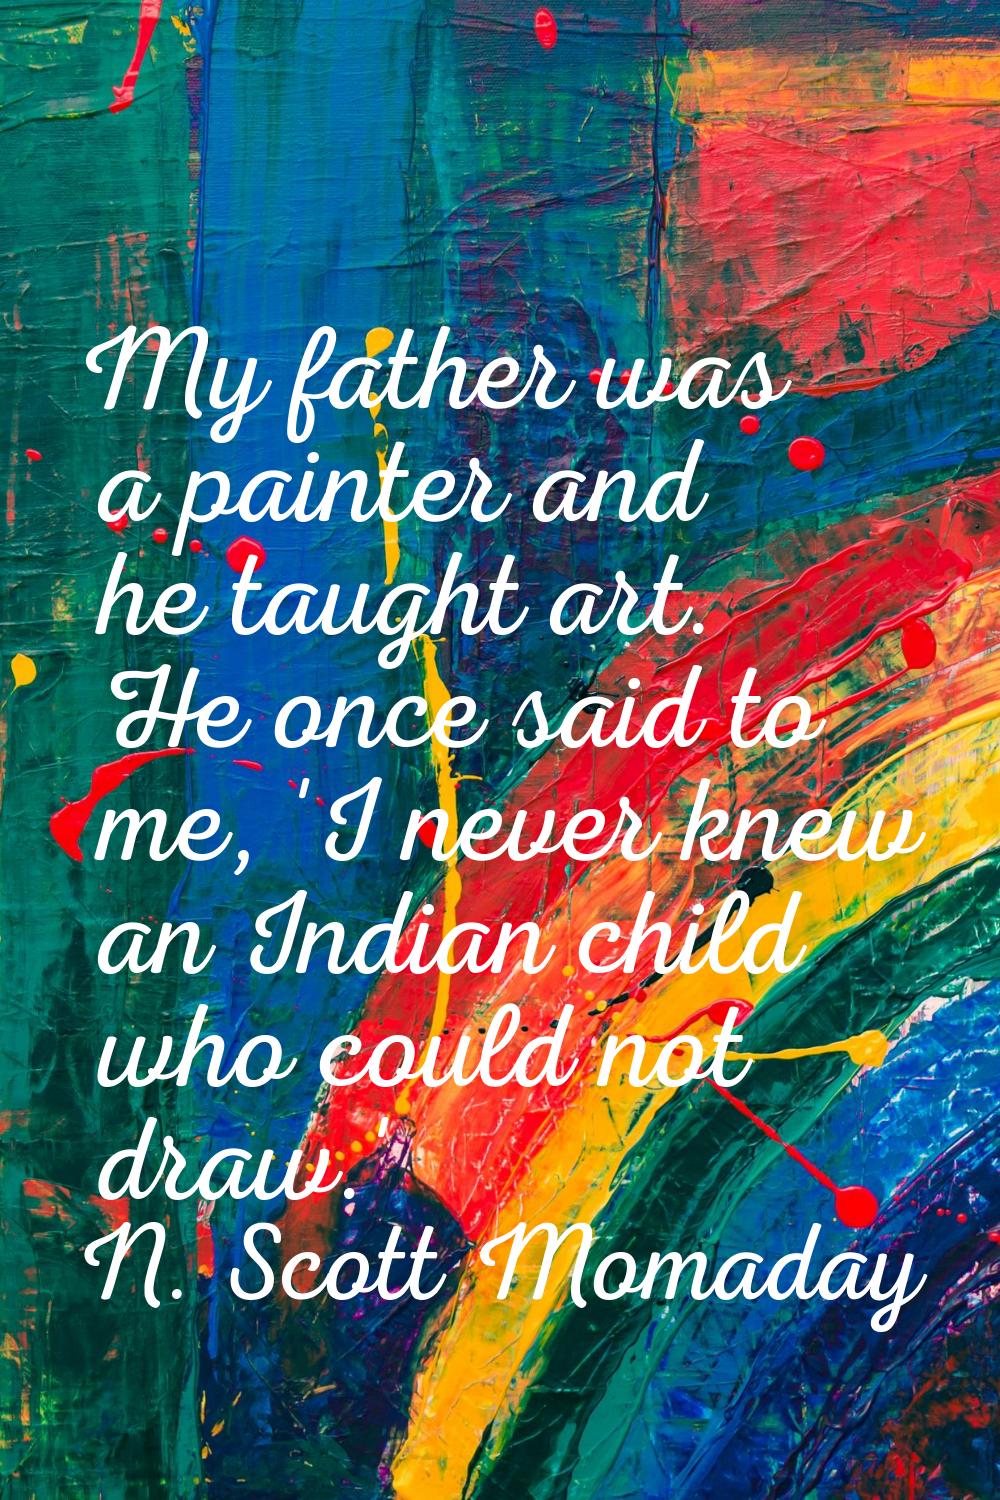 My father was a painter and he taught art. He once said to me, 'I never knew an Indian child who co